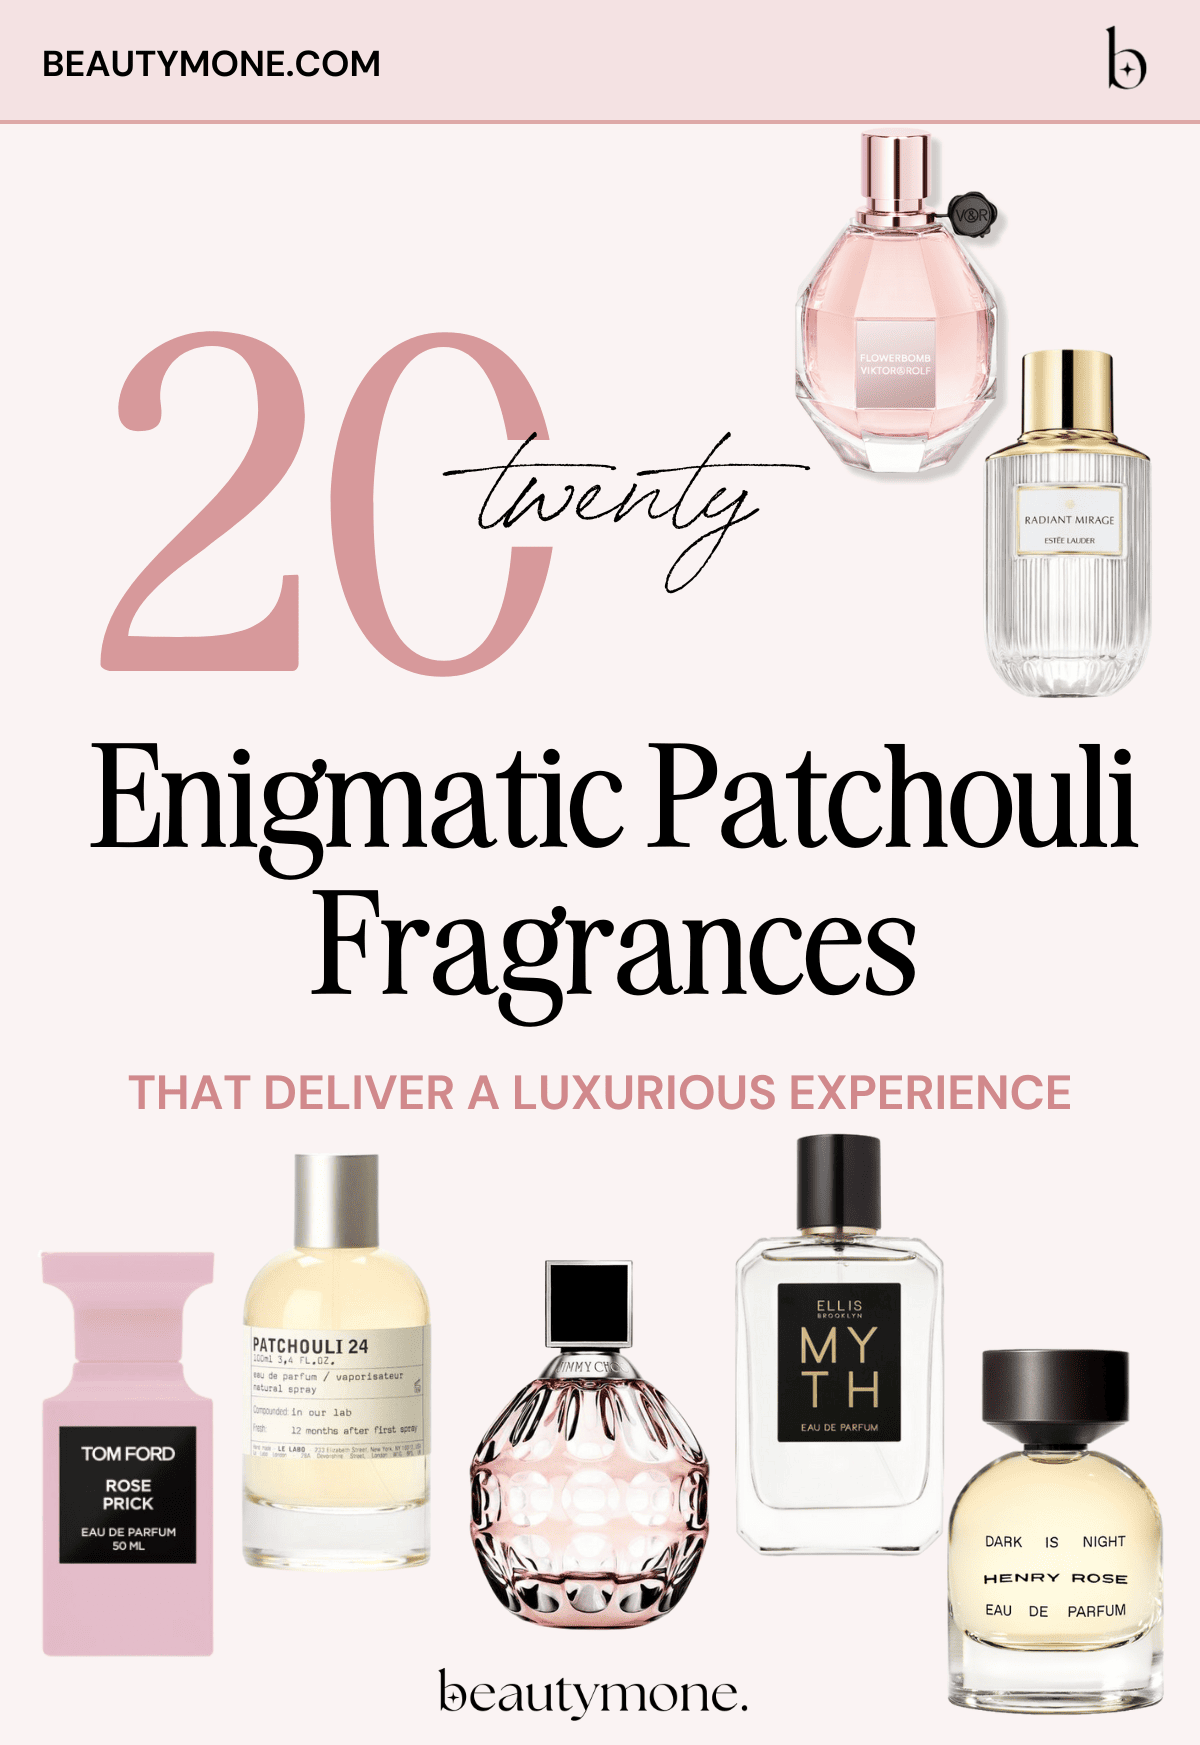 Patchouli Fragrances, What Does Patchouli Smell Like